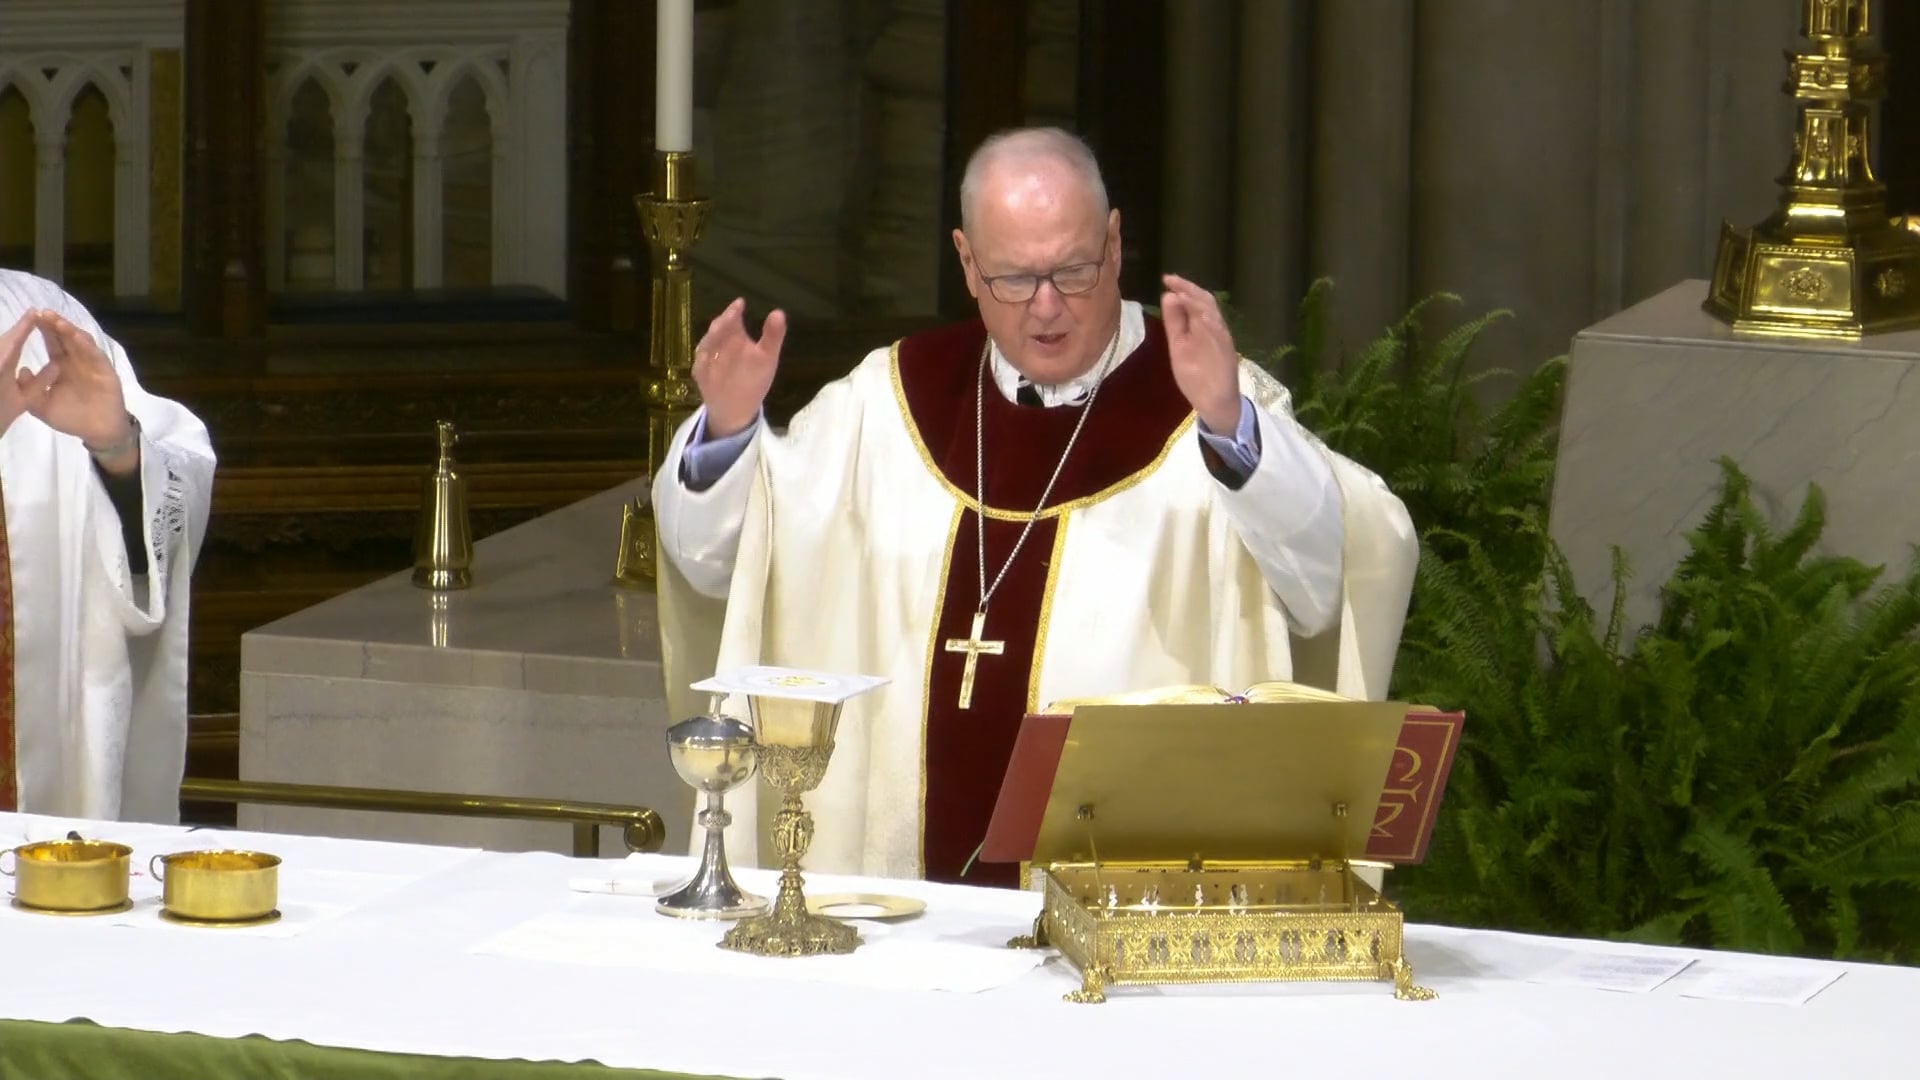 Mass from St. Patrick's Cathedral - September 23, 2022